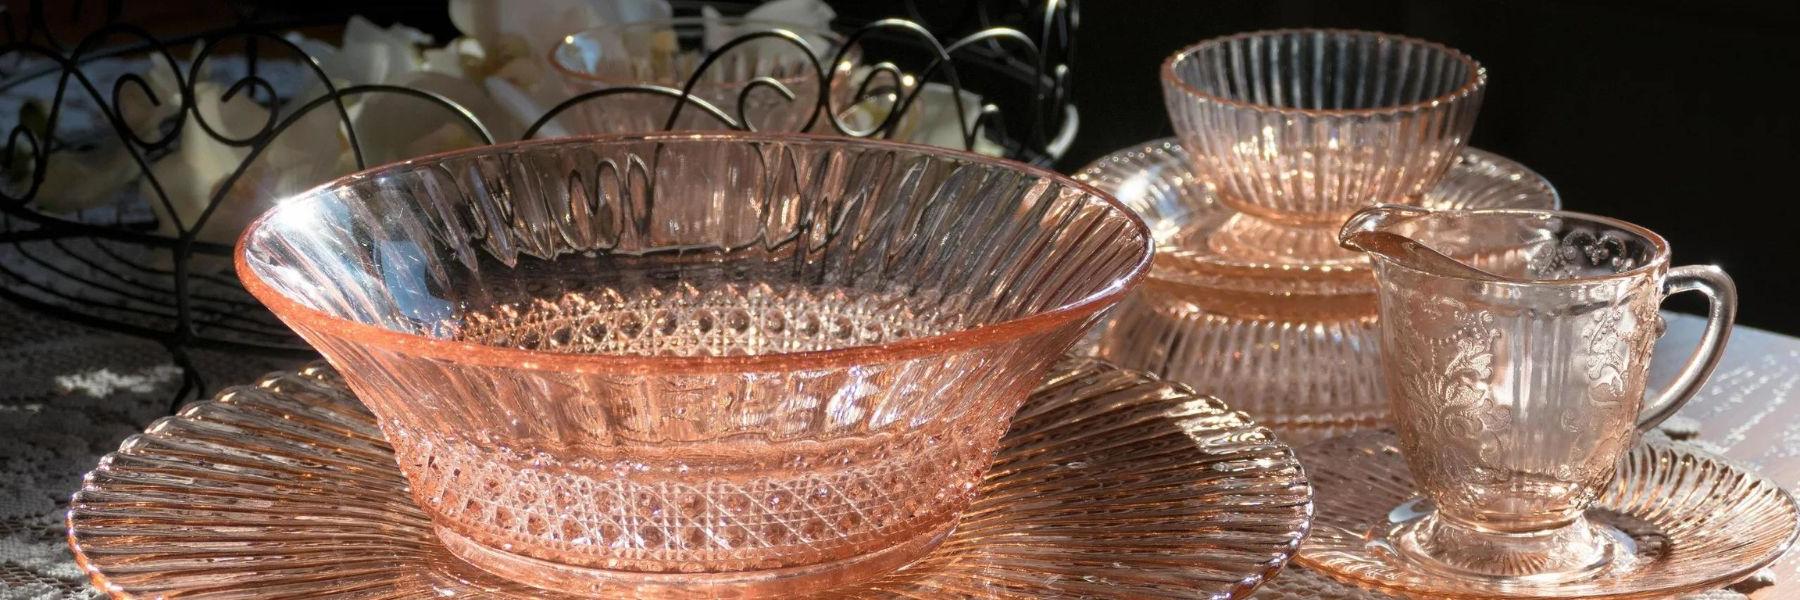 Antiques such as Depression glass abound in St. Louis.